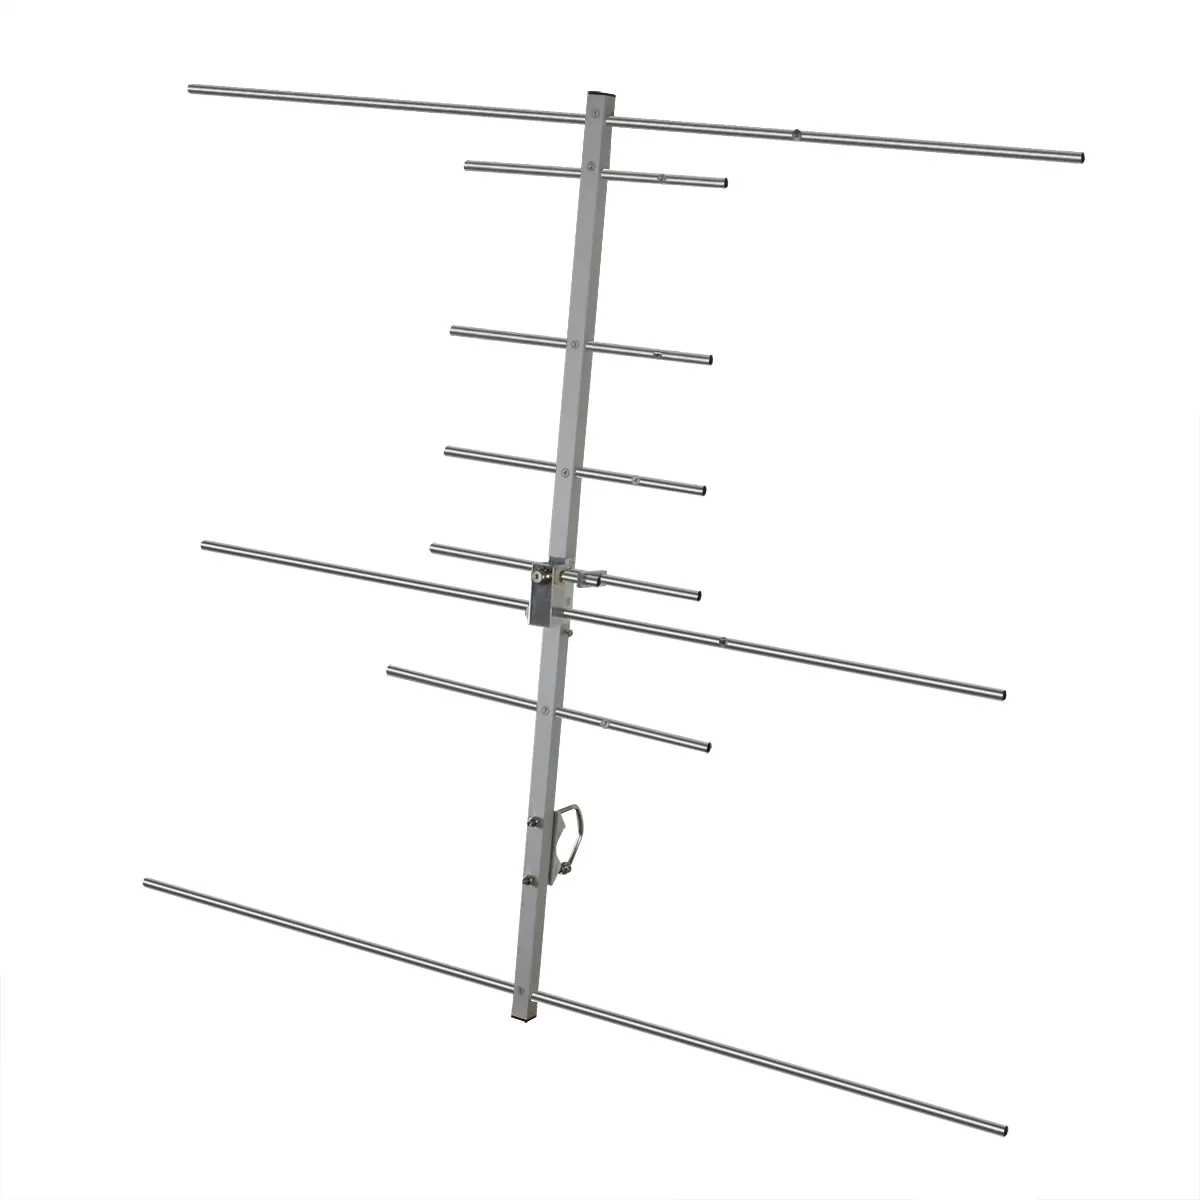 Ailunce AY04 Ad Alto Guadagno UHF VHF <span class=keywords><strong>Yagi</strong></span> Antenna144 & 430 MHz Direzionale <span class=keywords><strong>Antenna</strong></span> Dual band Orizzontale Verticale <span class=keywords><strong>Antenna</strong></span> A Buon Mercato <span class=keywords><strong>antenna</strong></span>